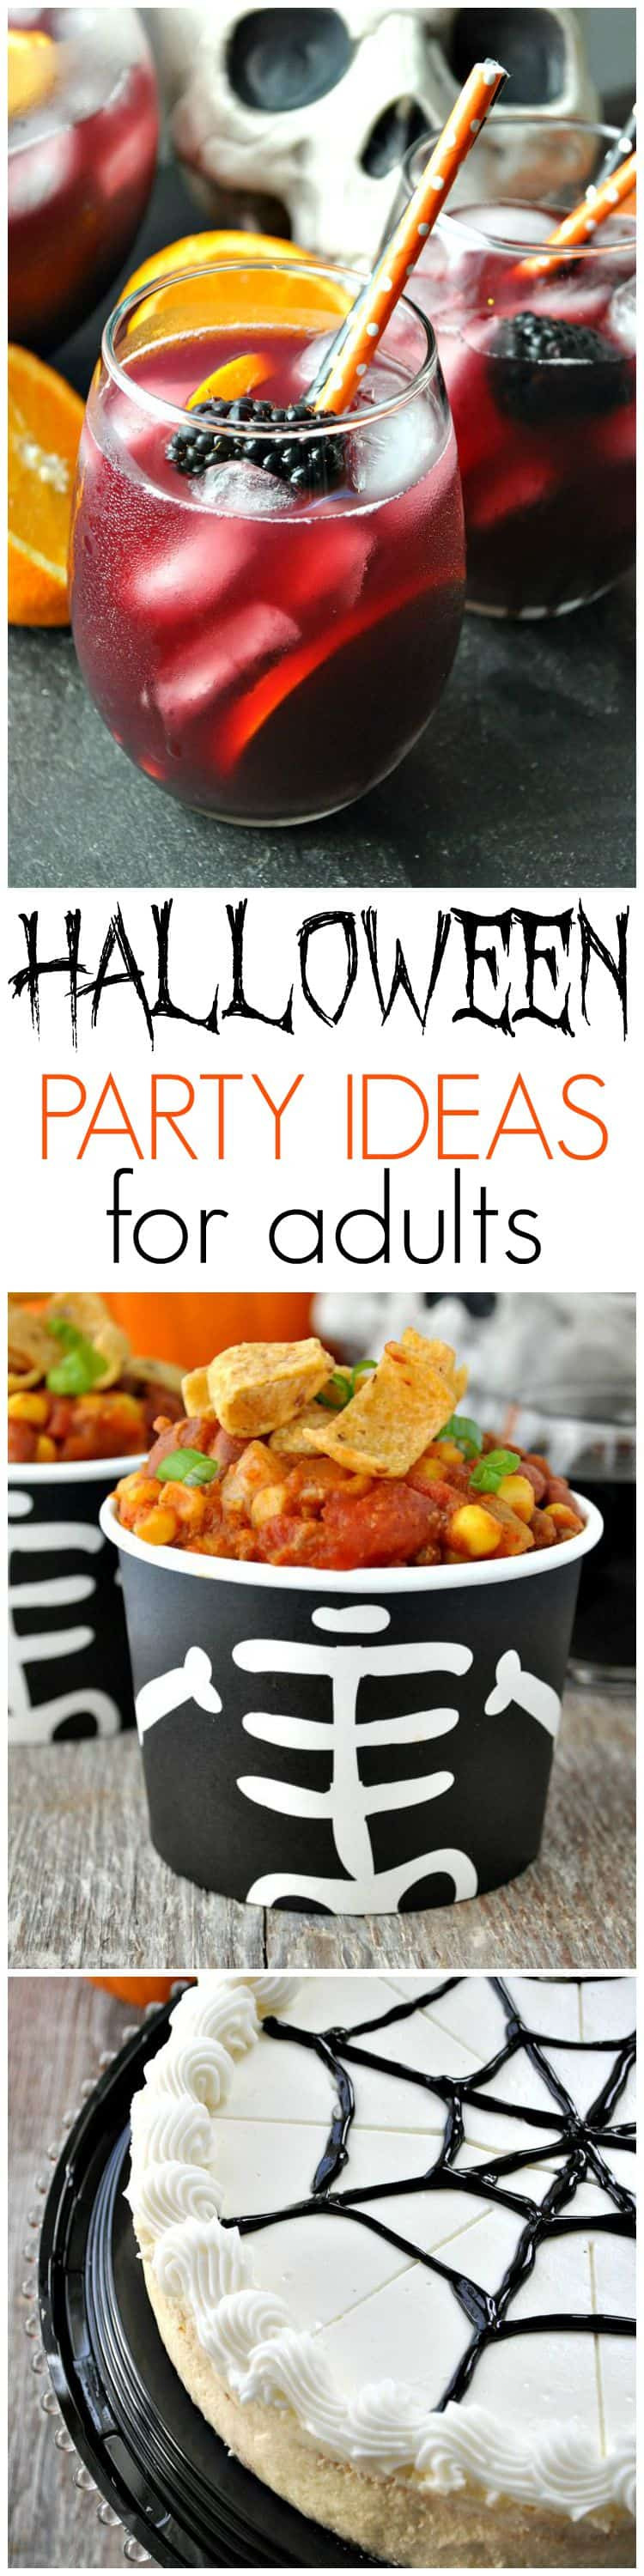 Halloween Party Ideas Adult
 Slow Cooker Pumpkin Chili Halloween Party Ideas for